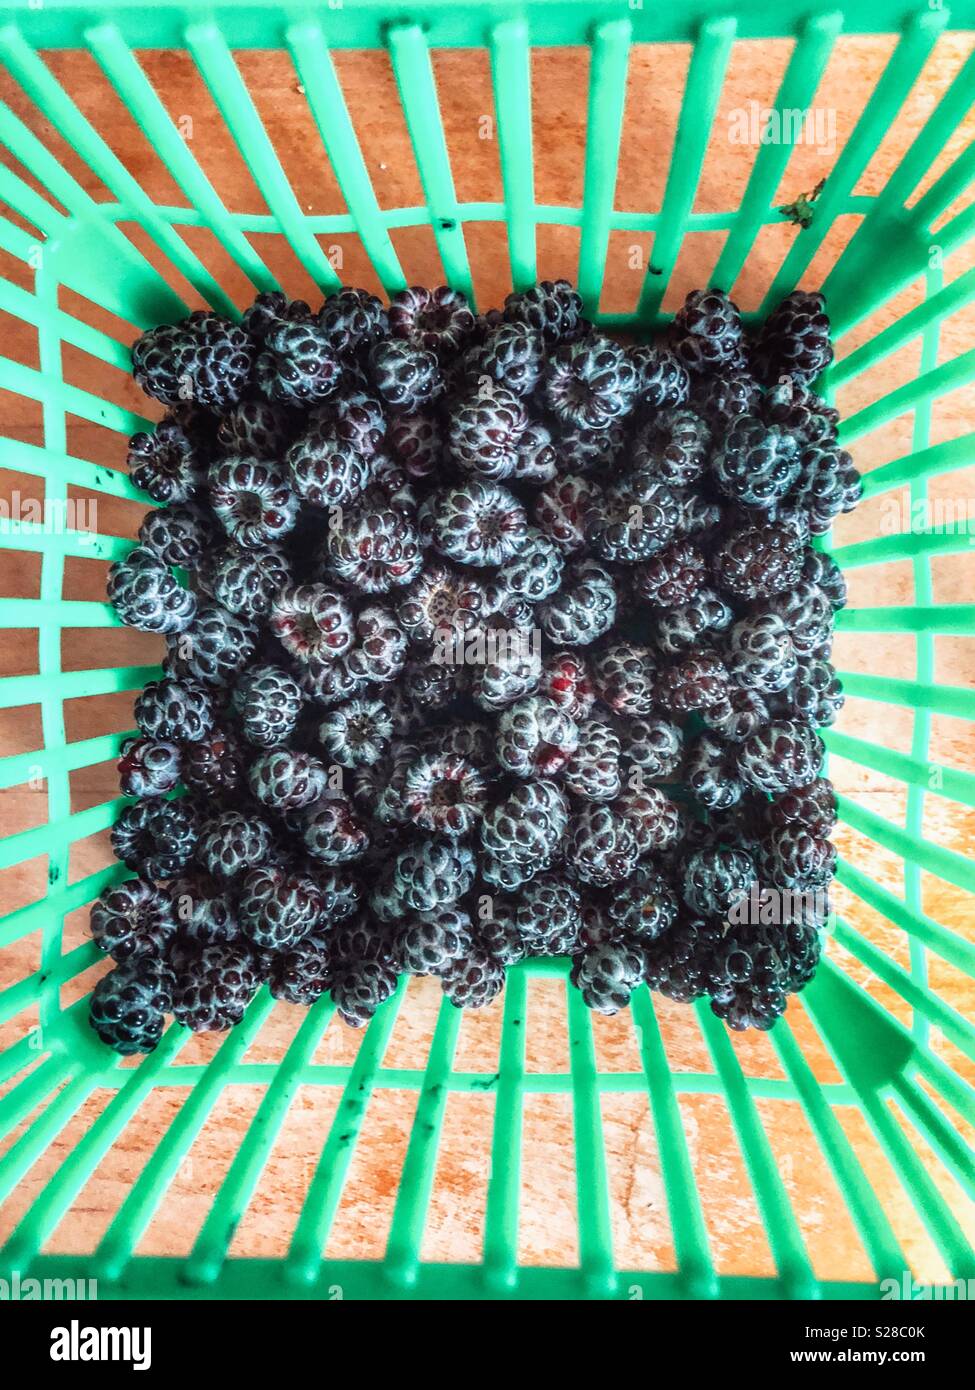 Fresh picked wild blackberries in a green plastic quart container Stock Photo